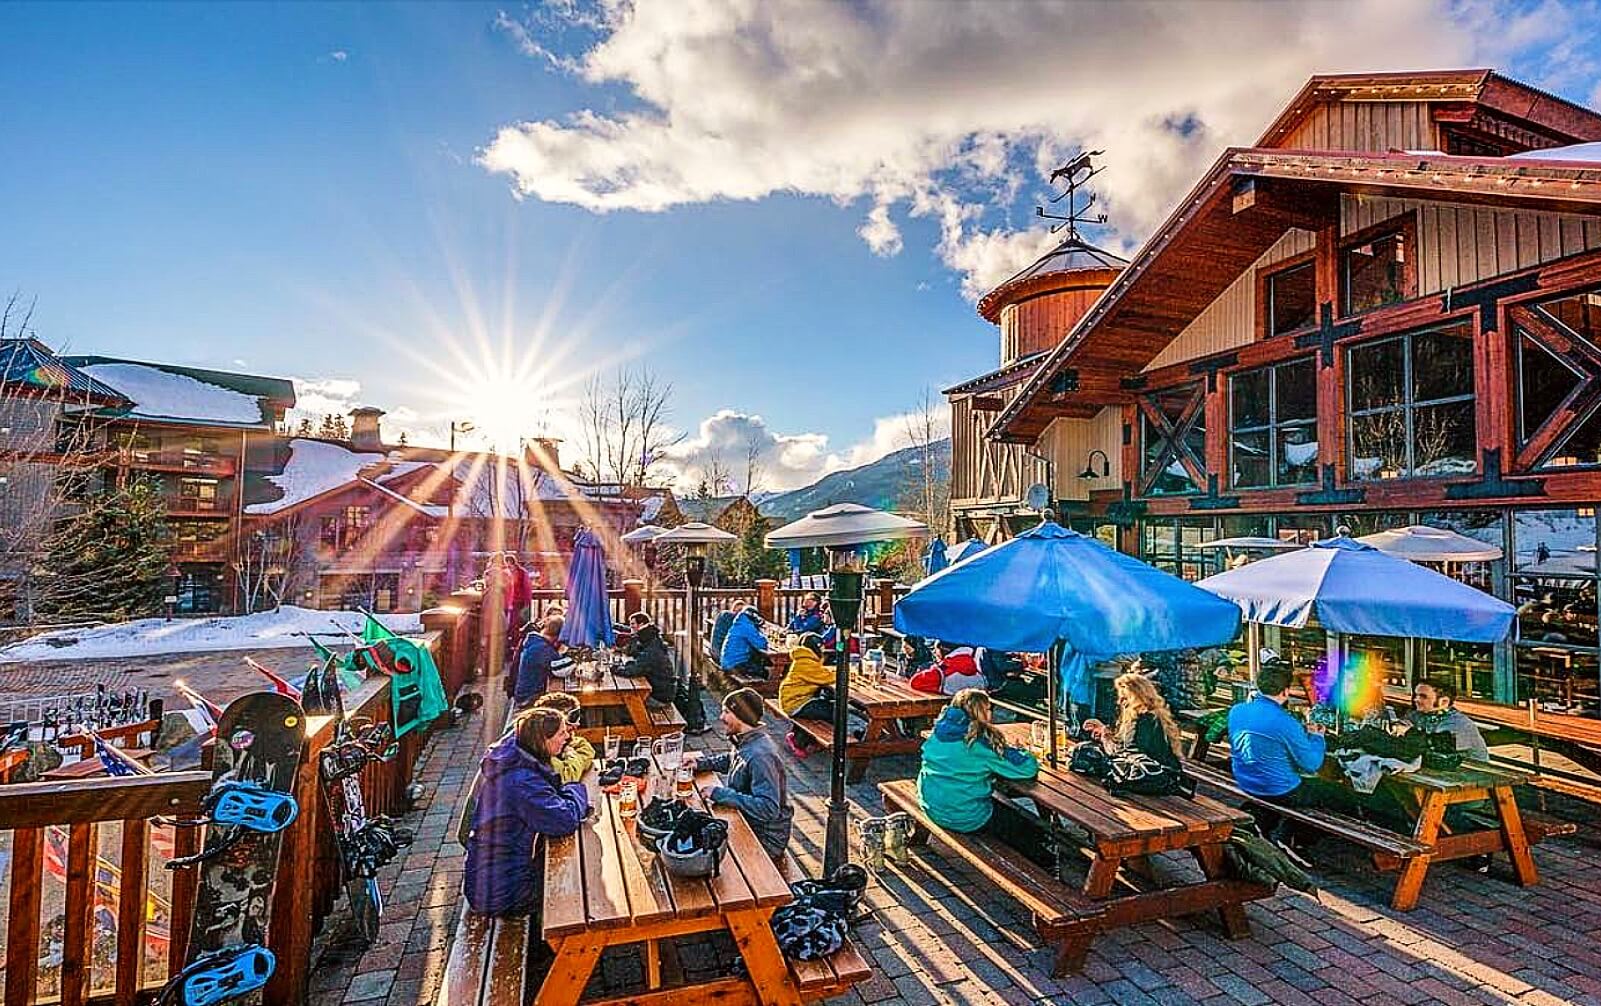 The patio at Dusty’s, Whistler